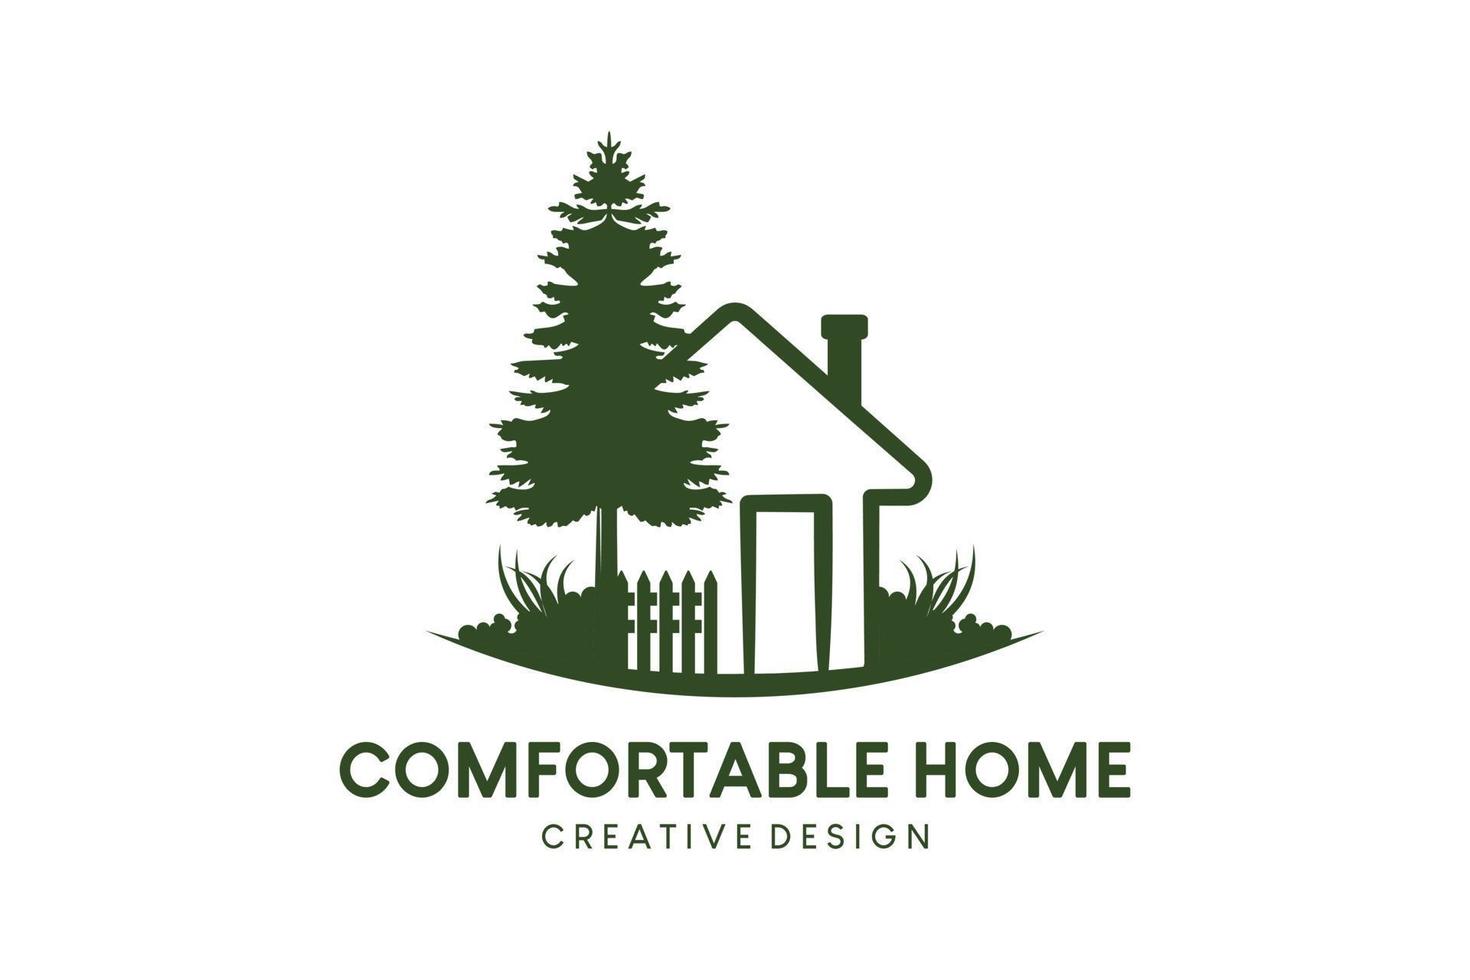 House icon logo design, hand drawn green house with trees and grass vector